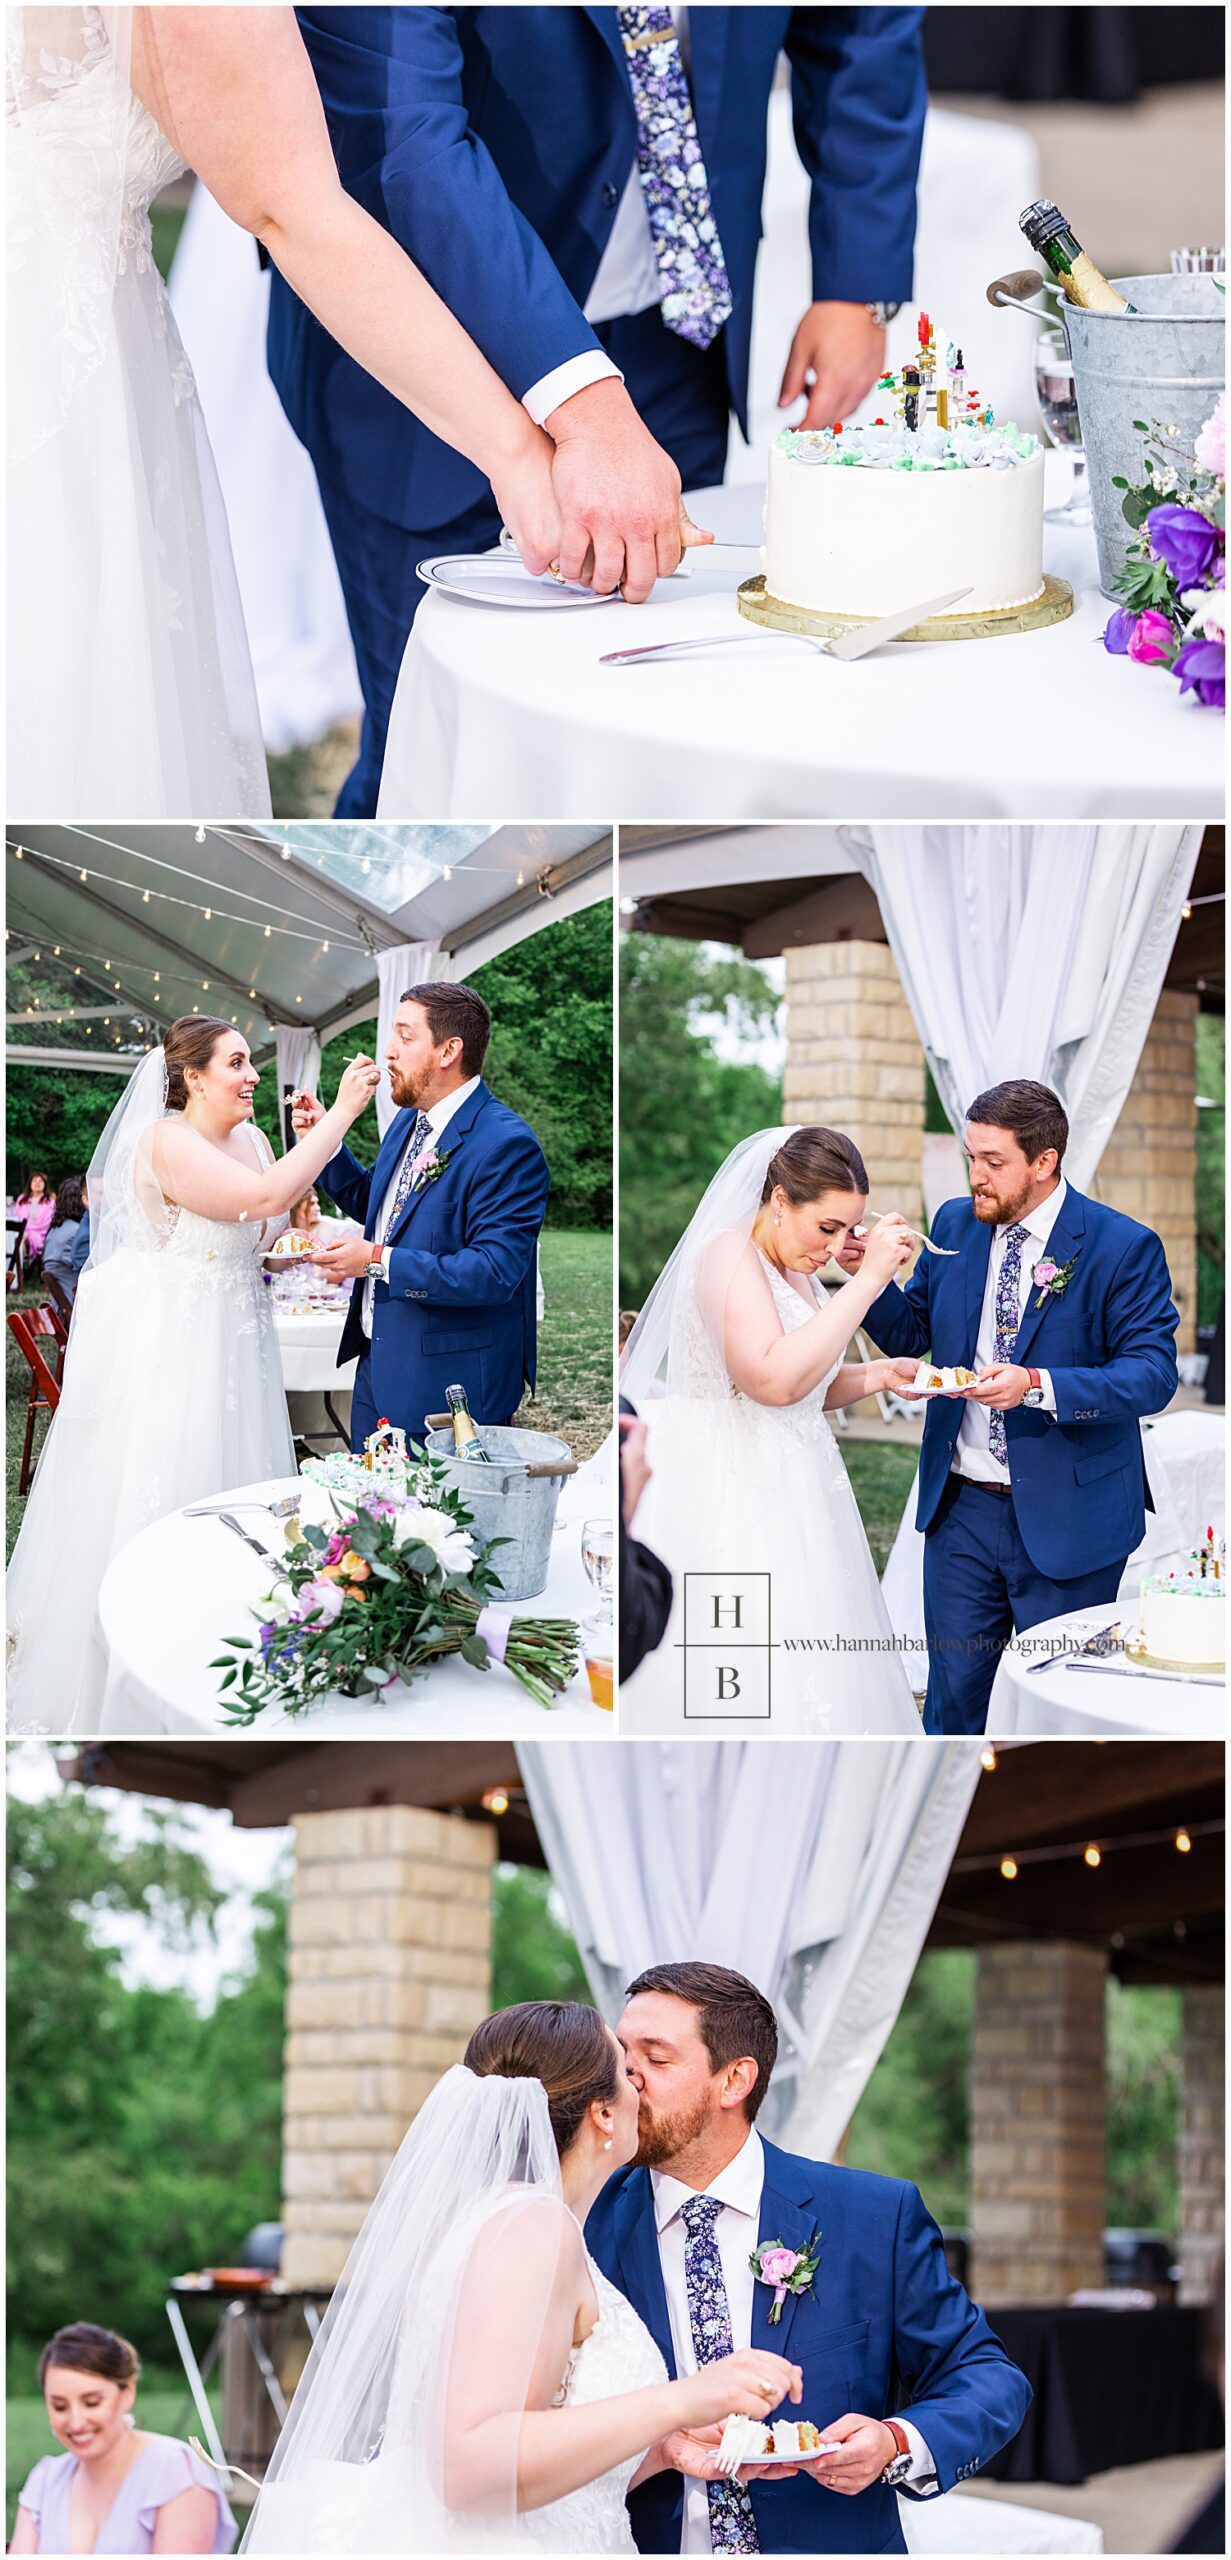 Couple cuts cake at outdoor, spring, tent wedding.